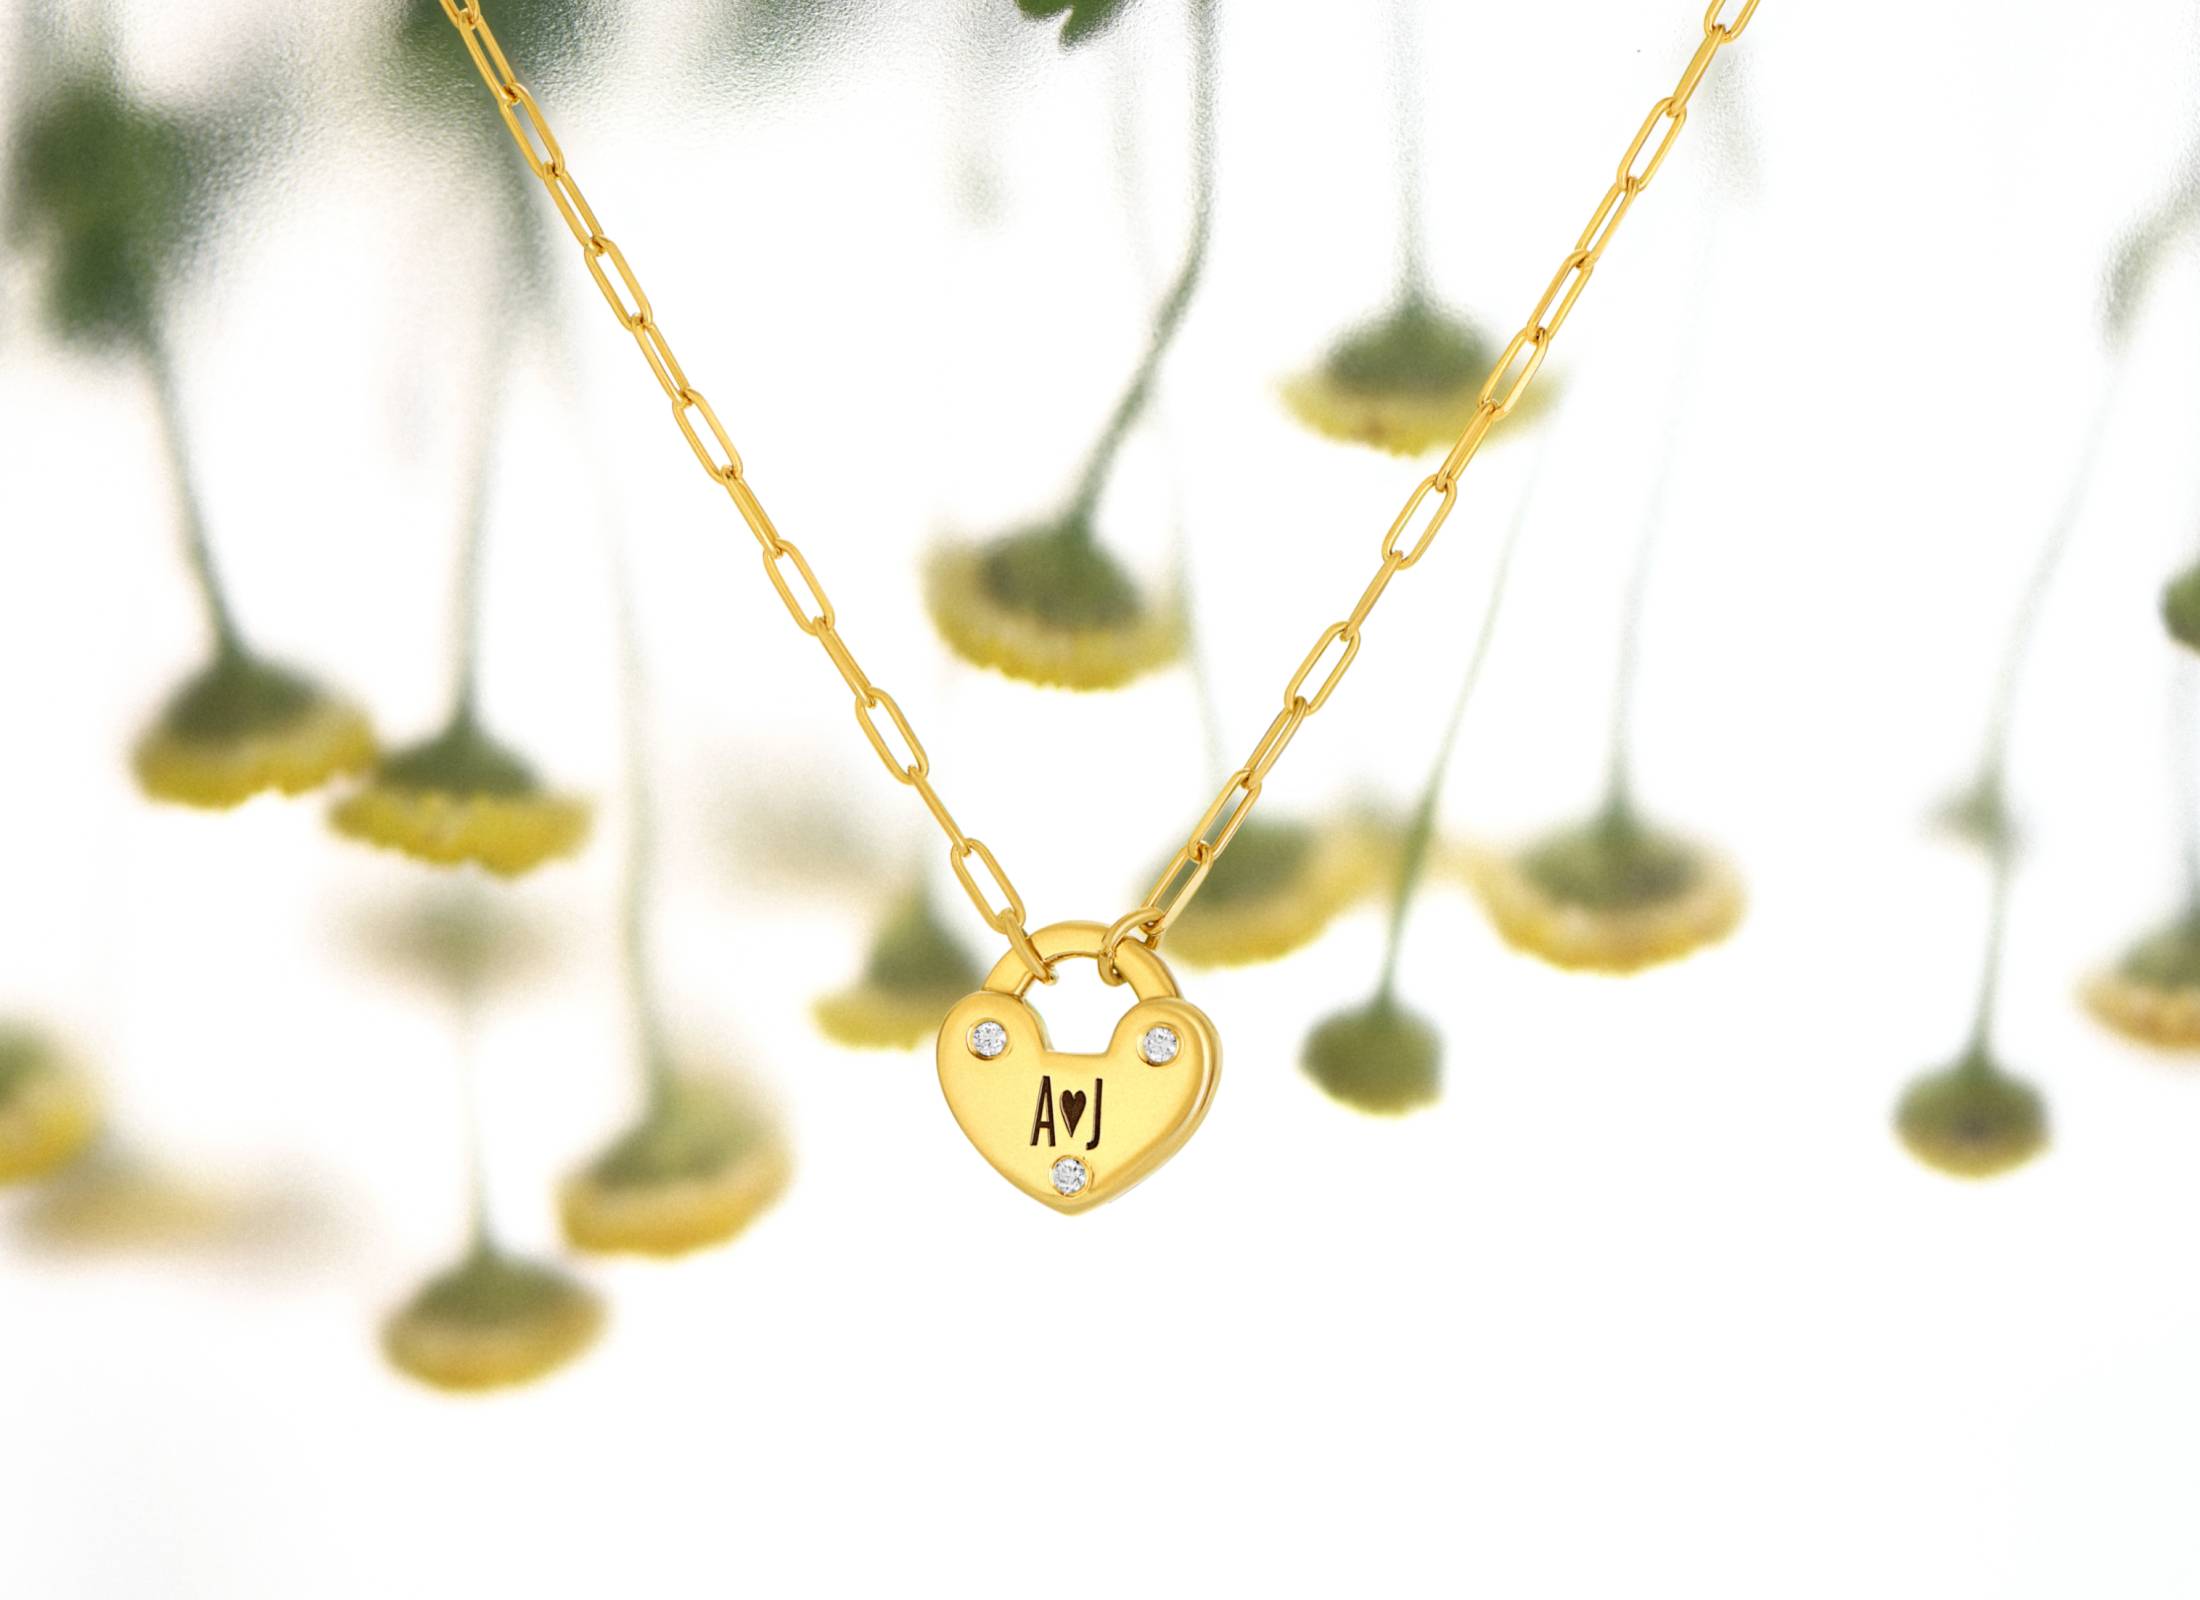 Initials Heart Charm Lock Necklace